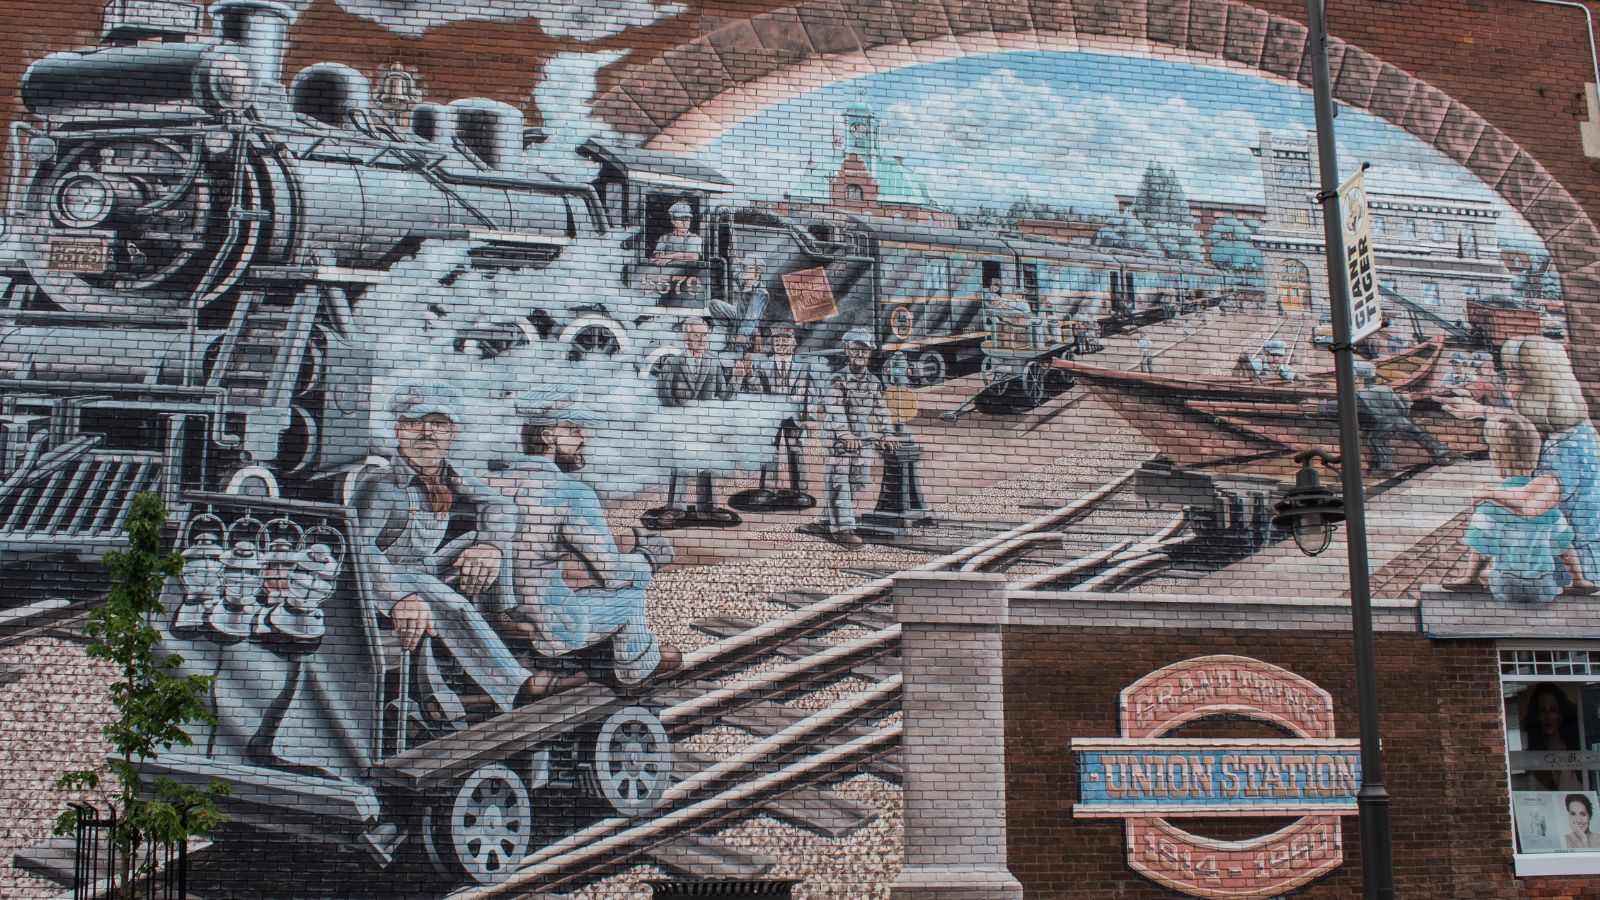 Photo of the Grand Trunk Union Station mural.